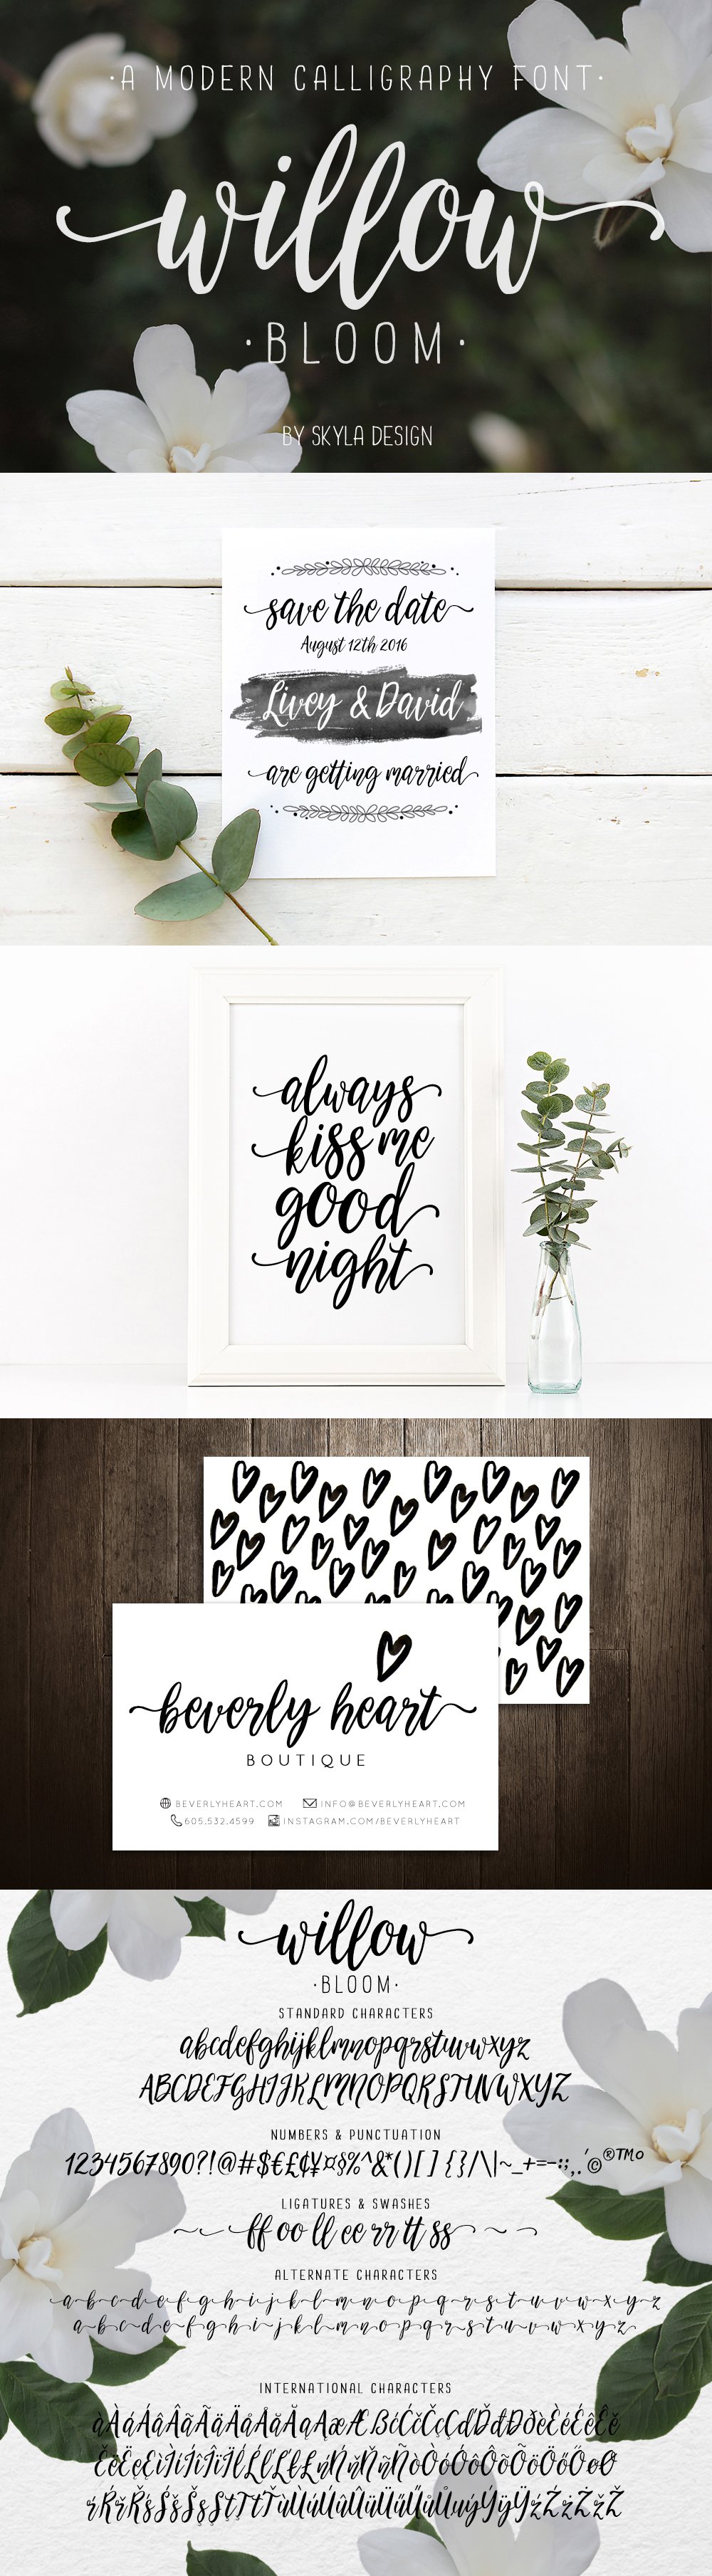 Willow Bloom modern calligraphy font cover image.